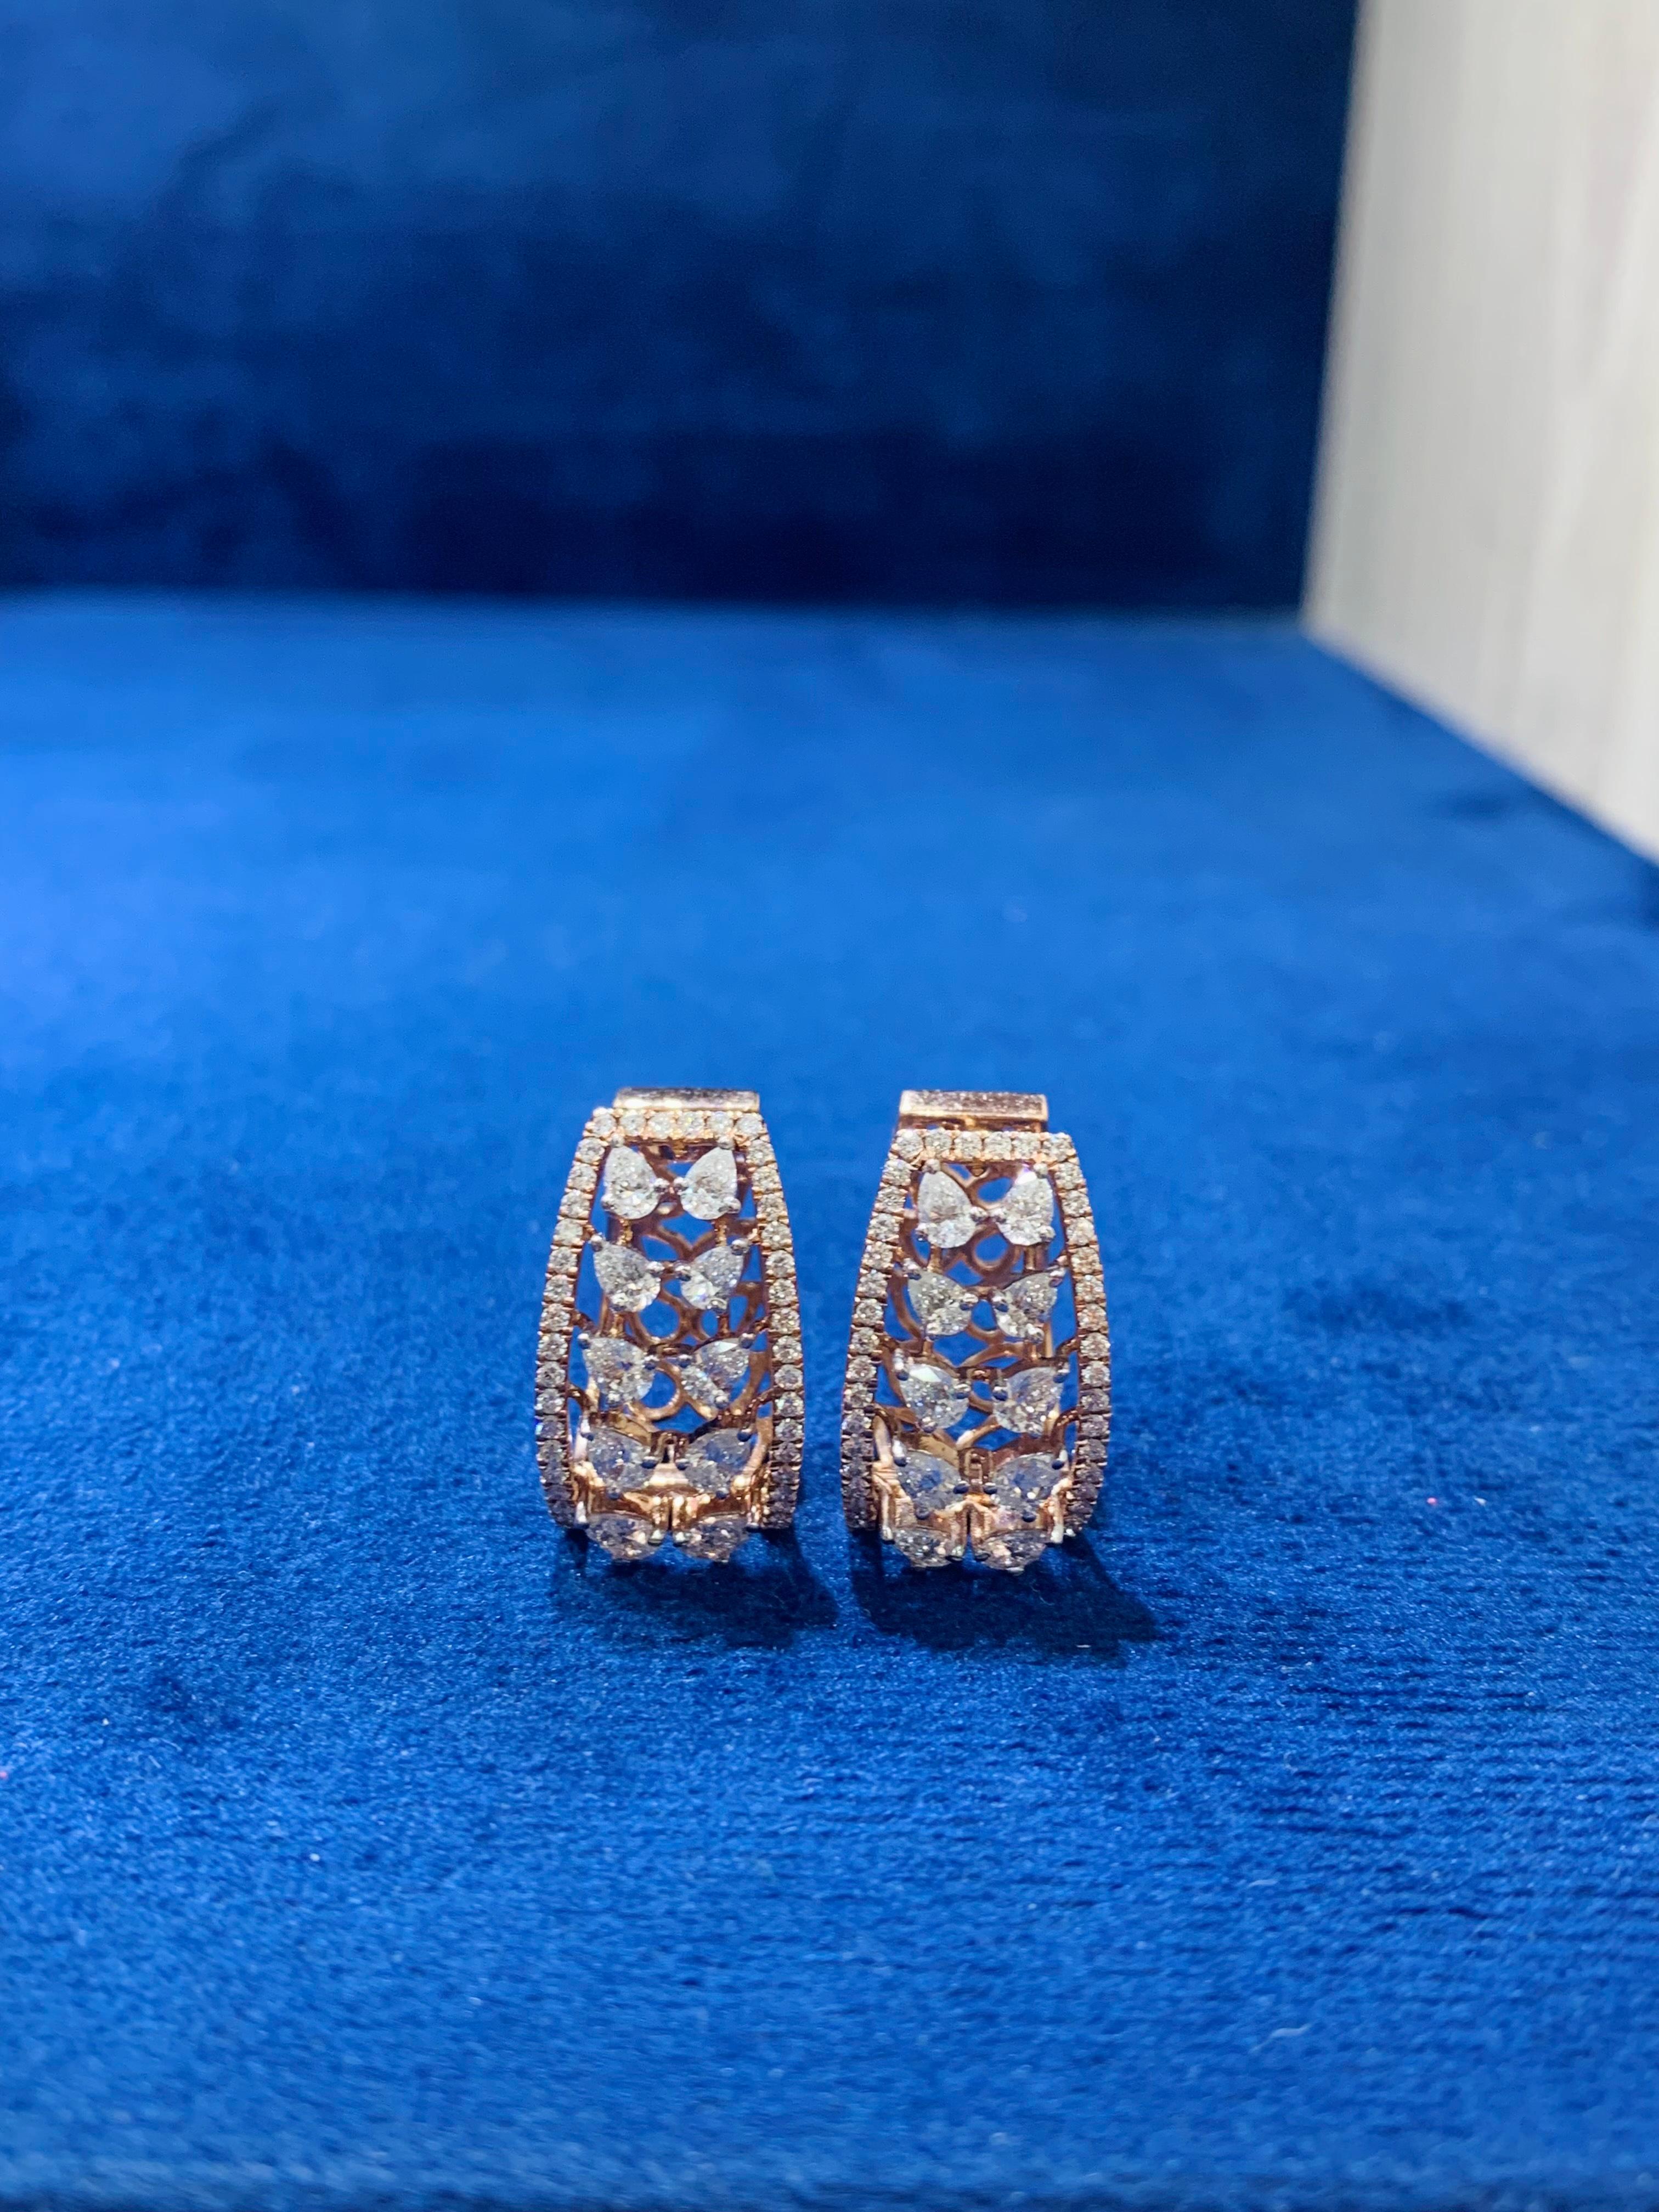 You are not quite dressed until a pair of earrings add sparkle.

Diamond Weight: 2.38 carats
Gold Weight: 9.340 gms